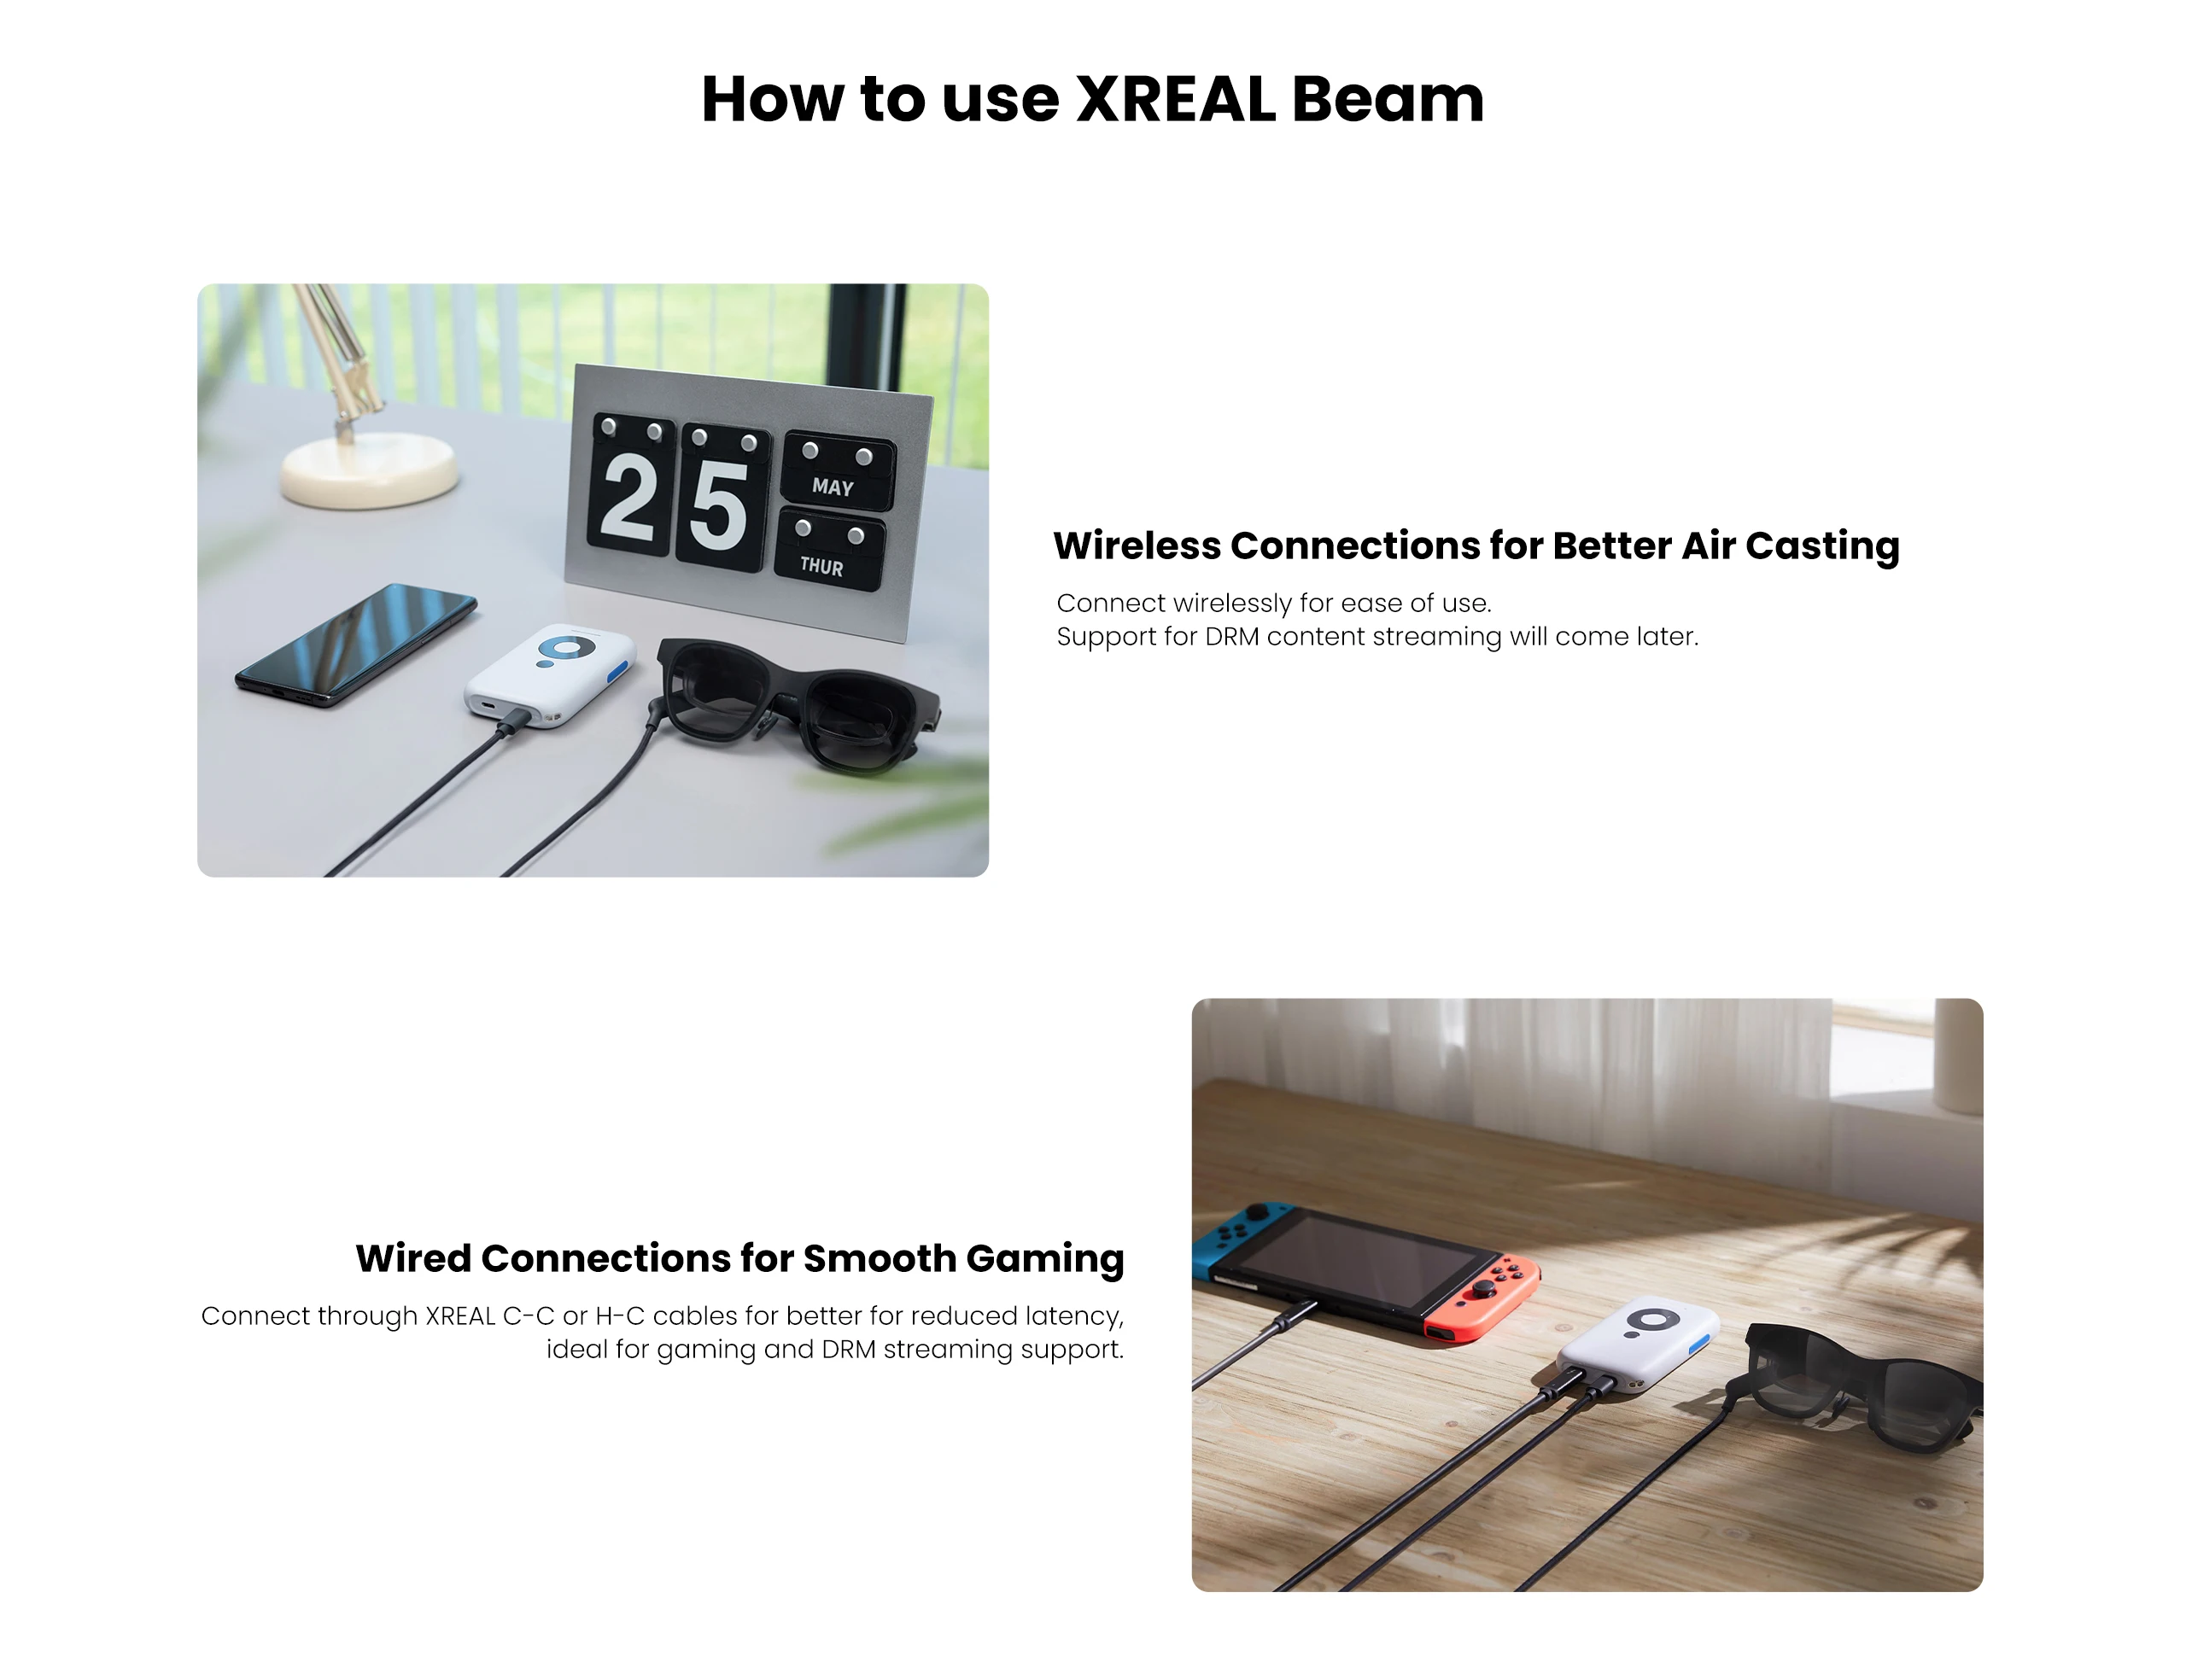 XREAL Beam Nreal Beam for Xreal XREAL Air 2 Smart AR Glasses Intelligent  Vision AR Space Screen Space Box Large Space Suit